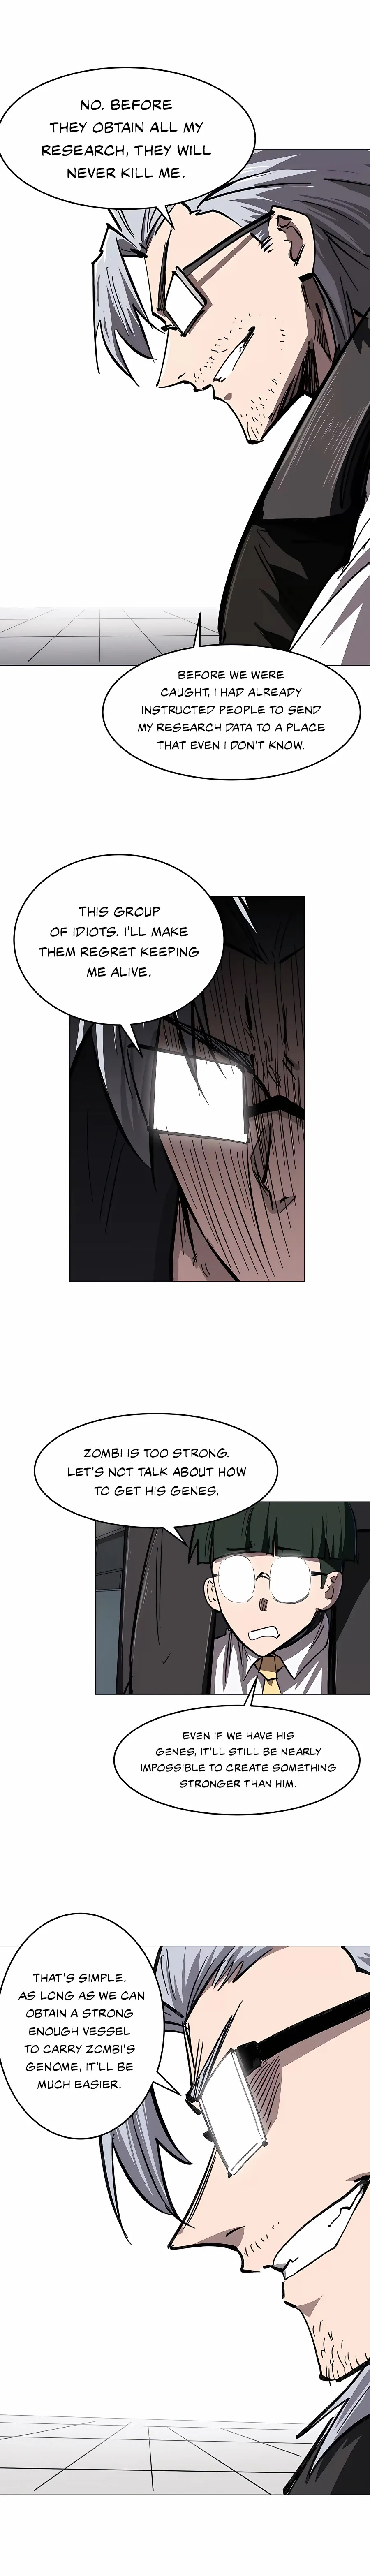 Mr. Zombie - Page 3